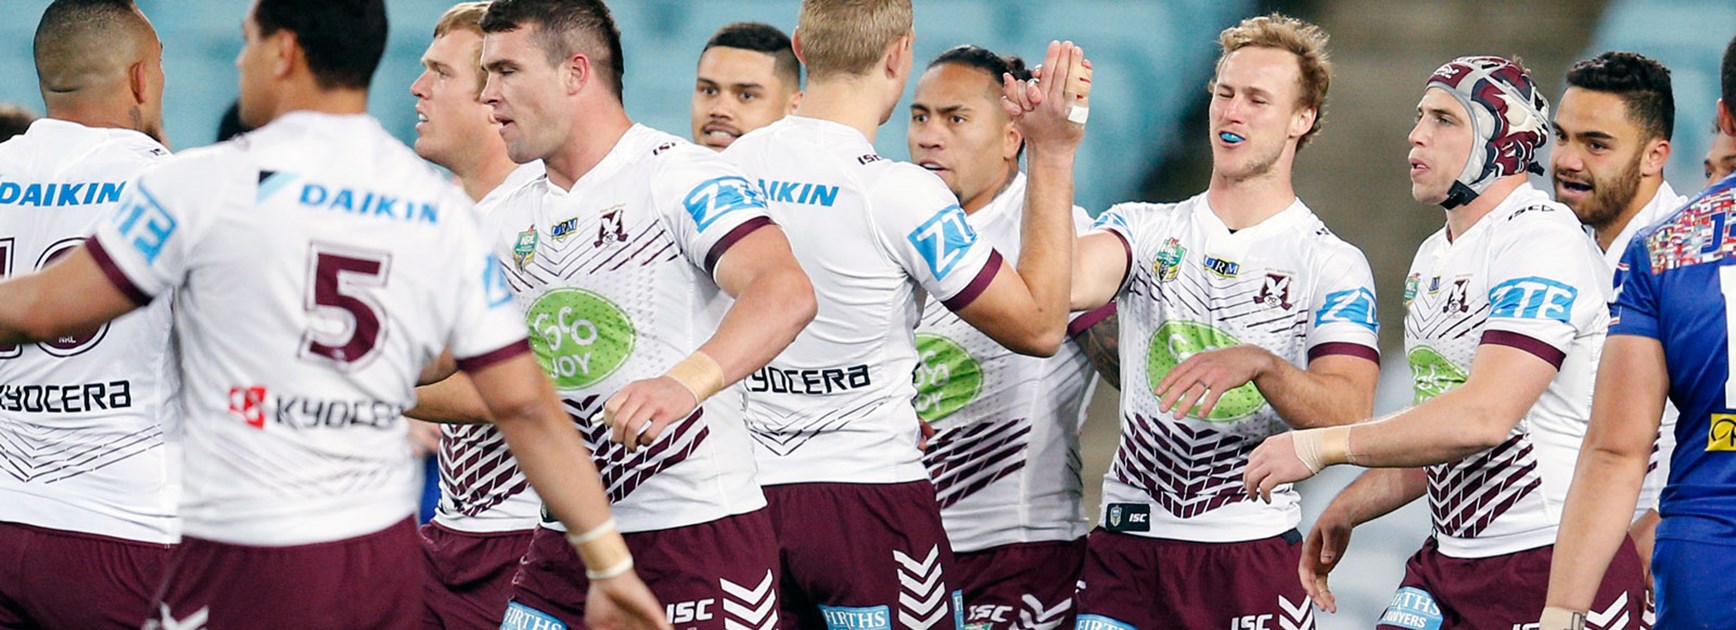 Sea Eagles players celebrate against the Bulldogs in Round 23.